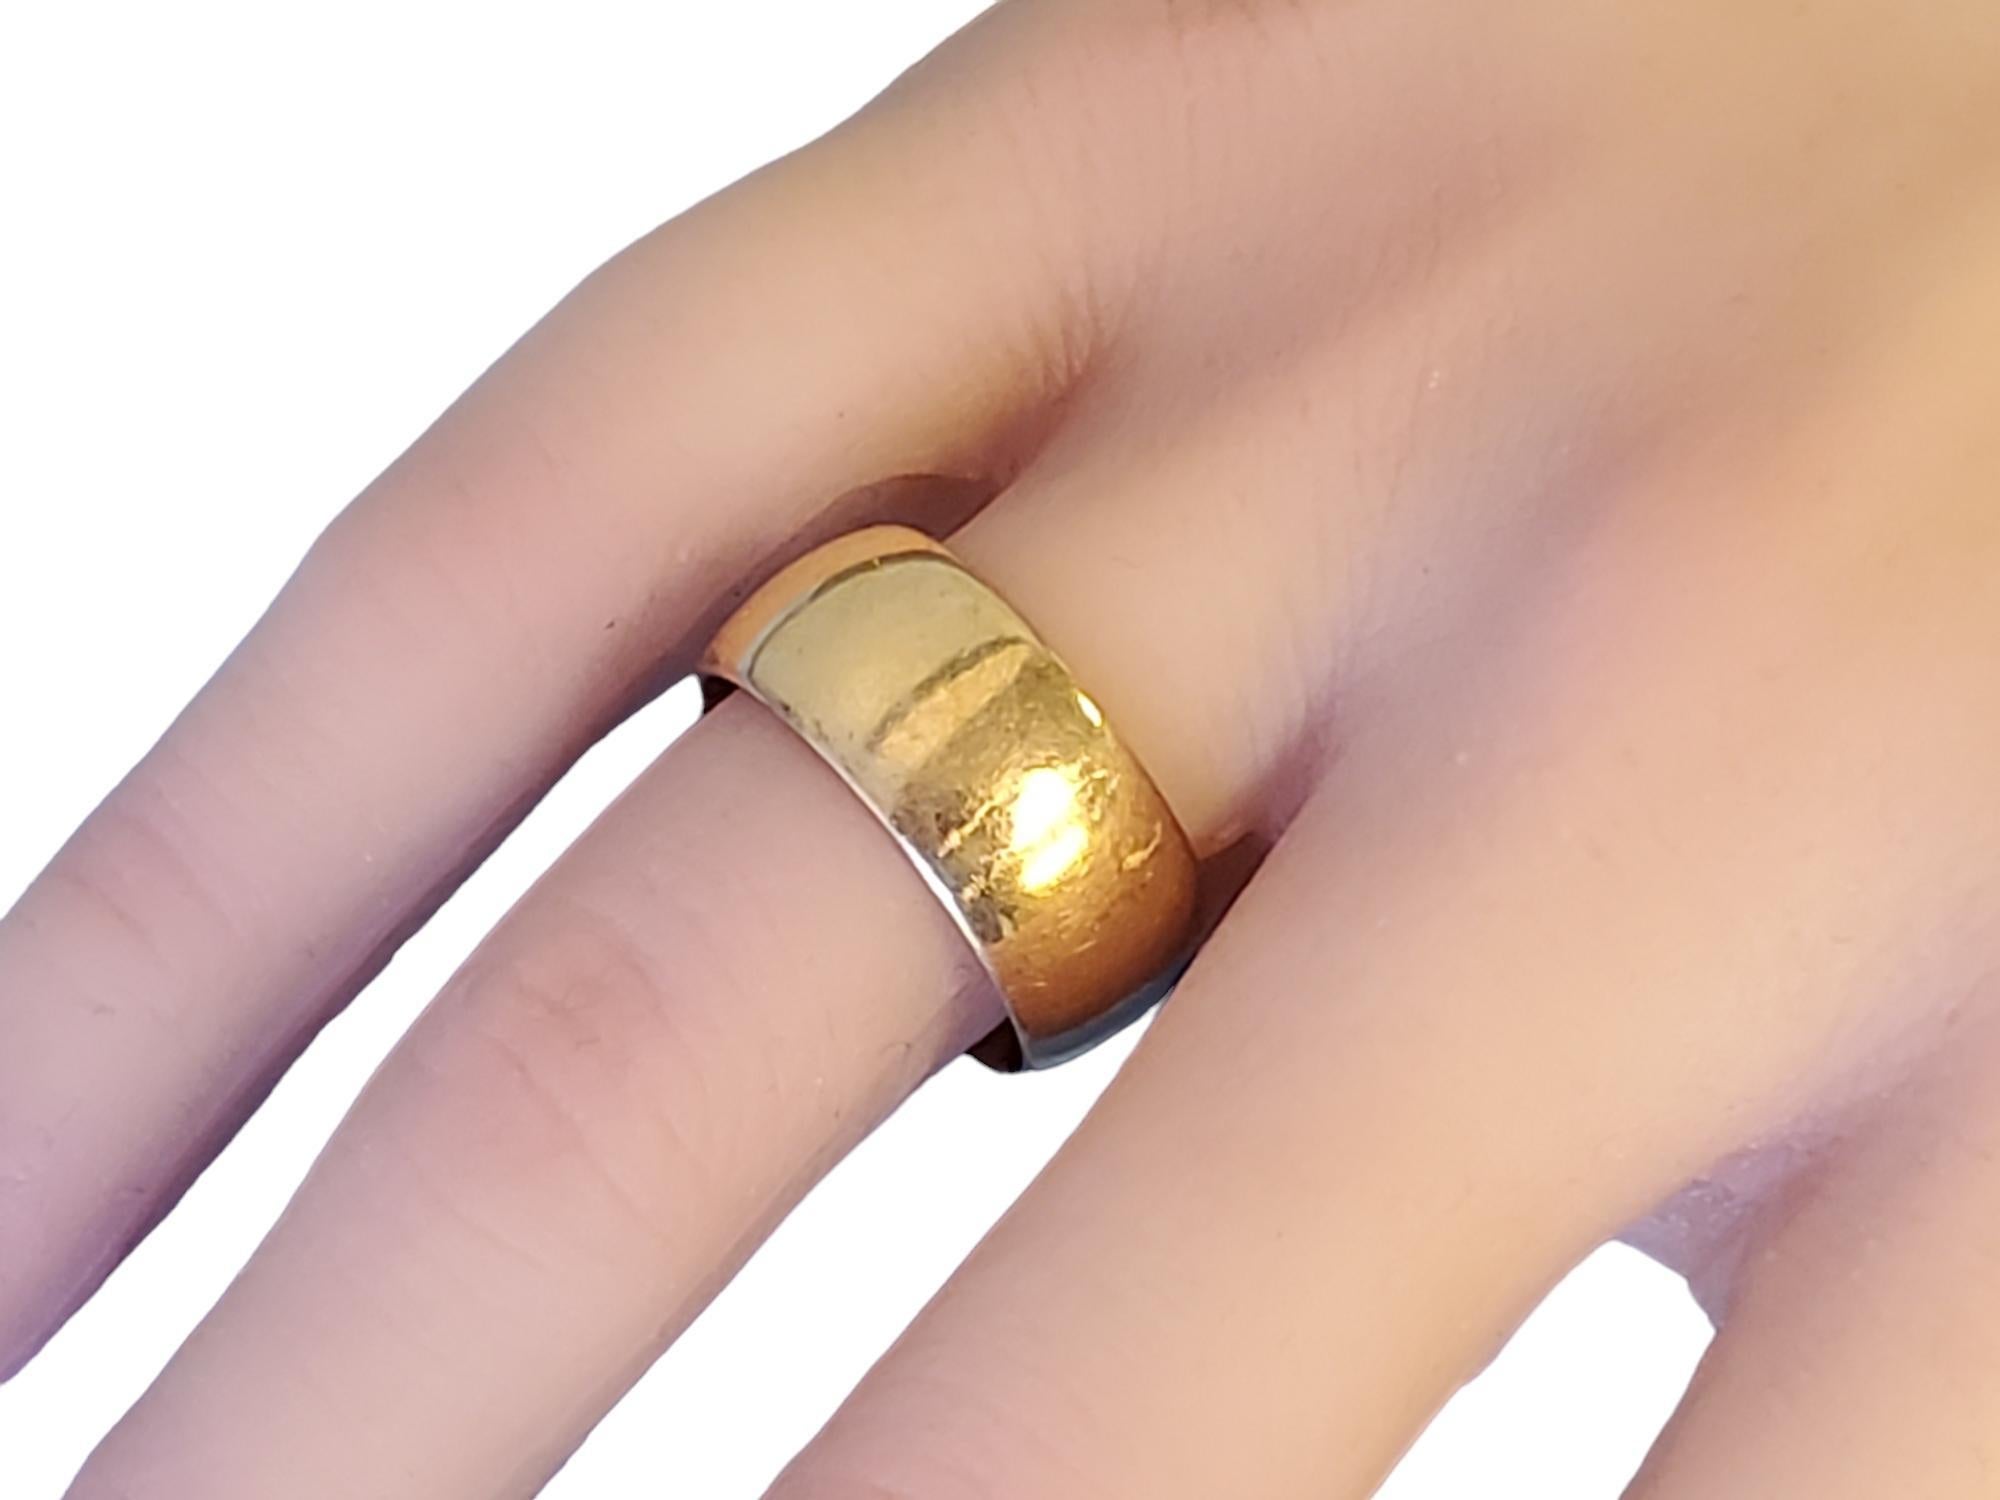 Antique 18k Yellow Gold Band Circa 1896

Listed is an antique 18k yellow gold band engraved with initials, date and stamped for 18k gold. This was purchased with other pieces from an an old estate. The ring is 9.2mm wide and done in heavy 18k yellow